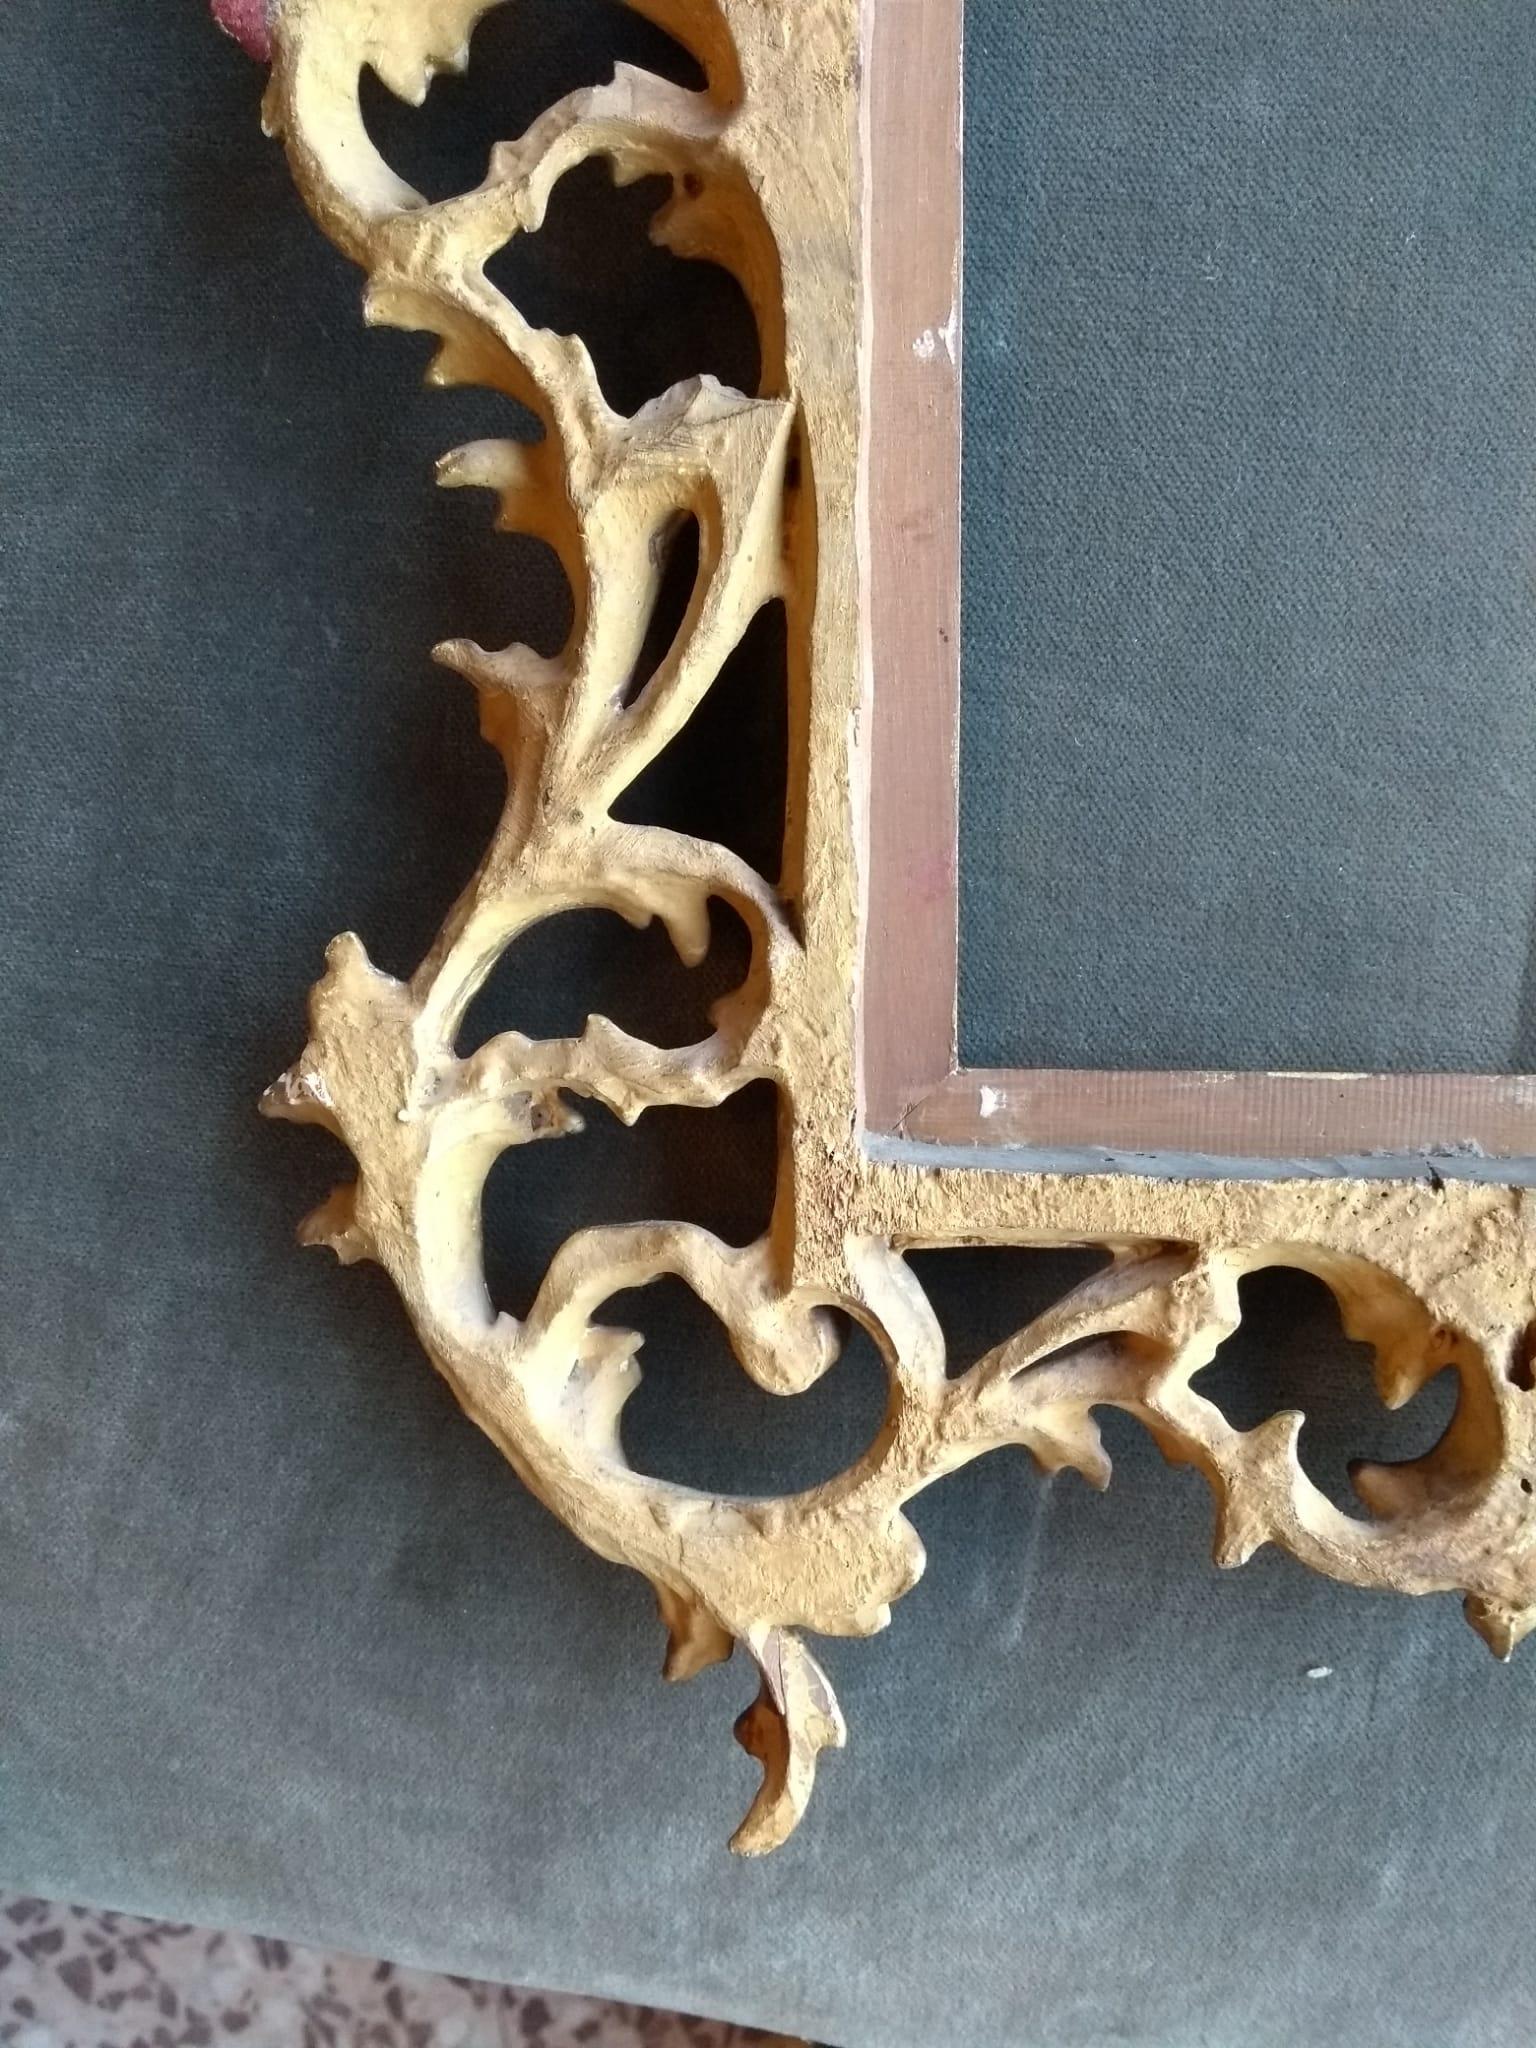 Finely Venetian carved frame from the late 17th century, finished in gold leaf.